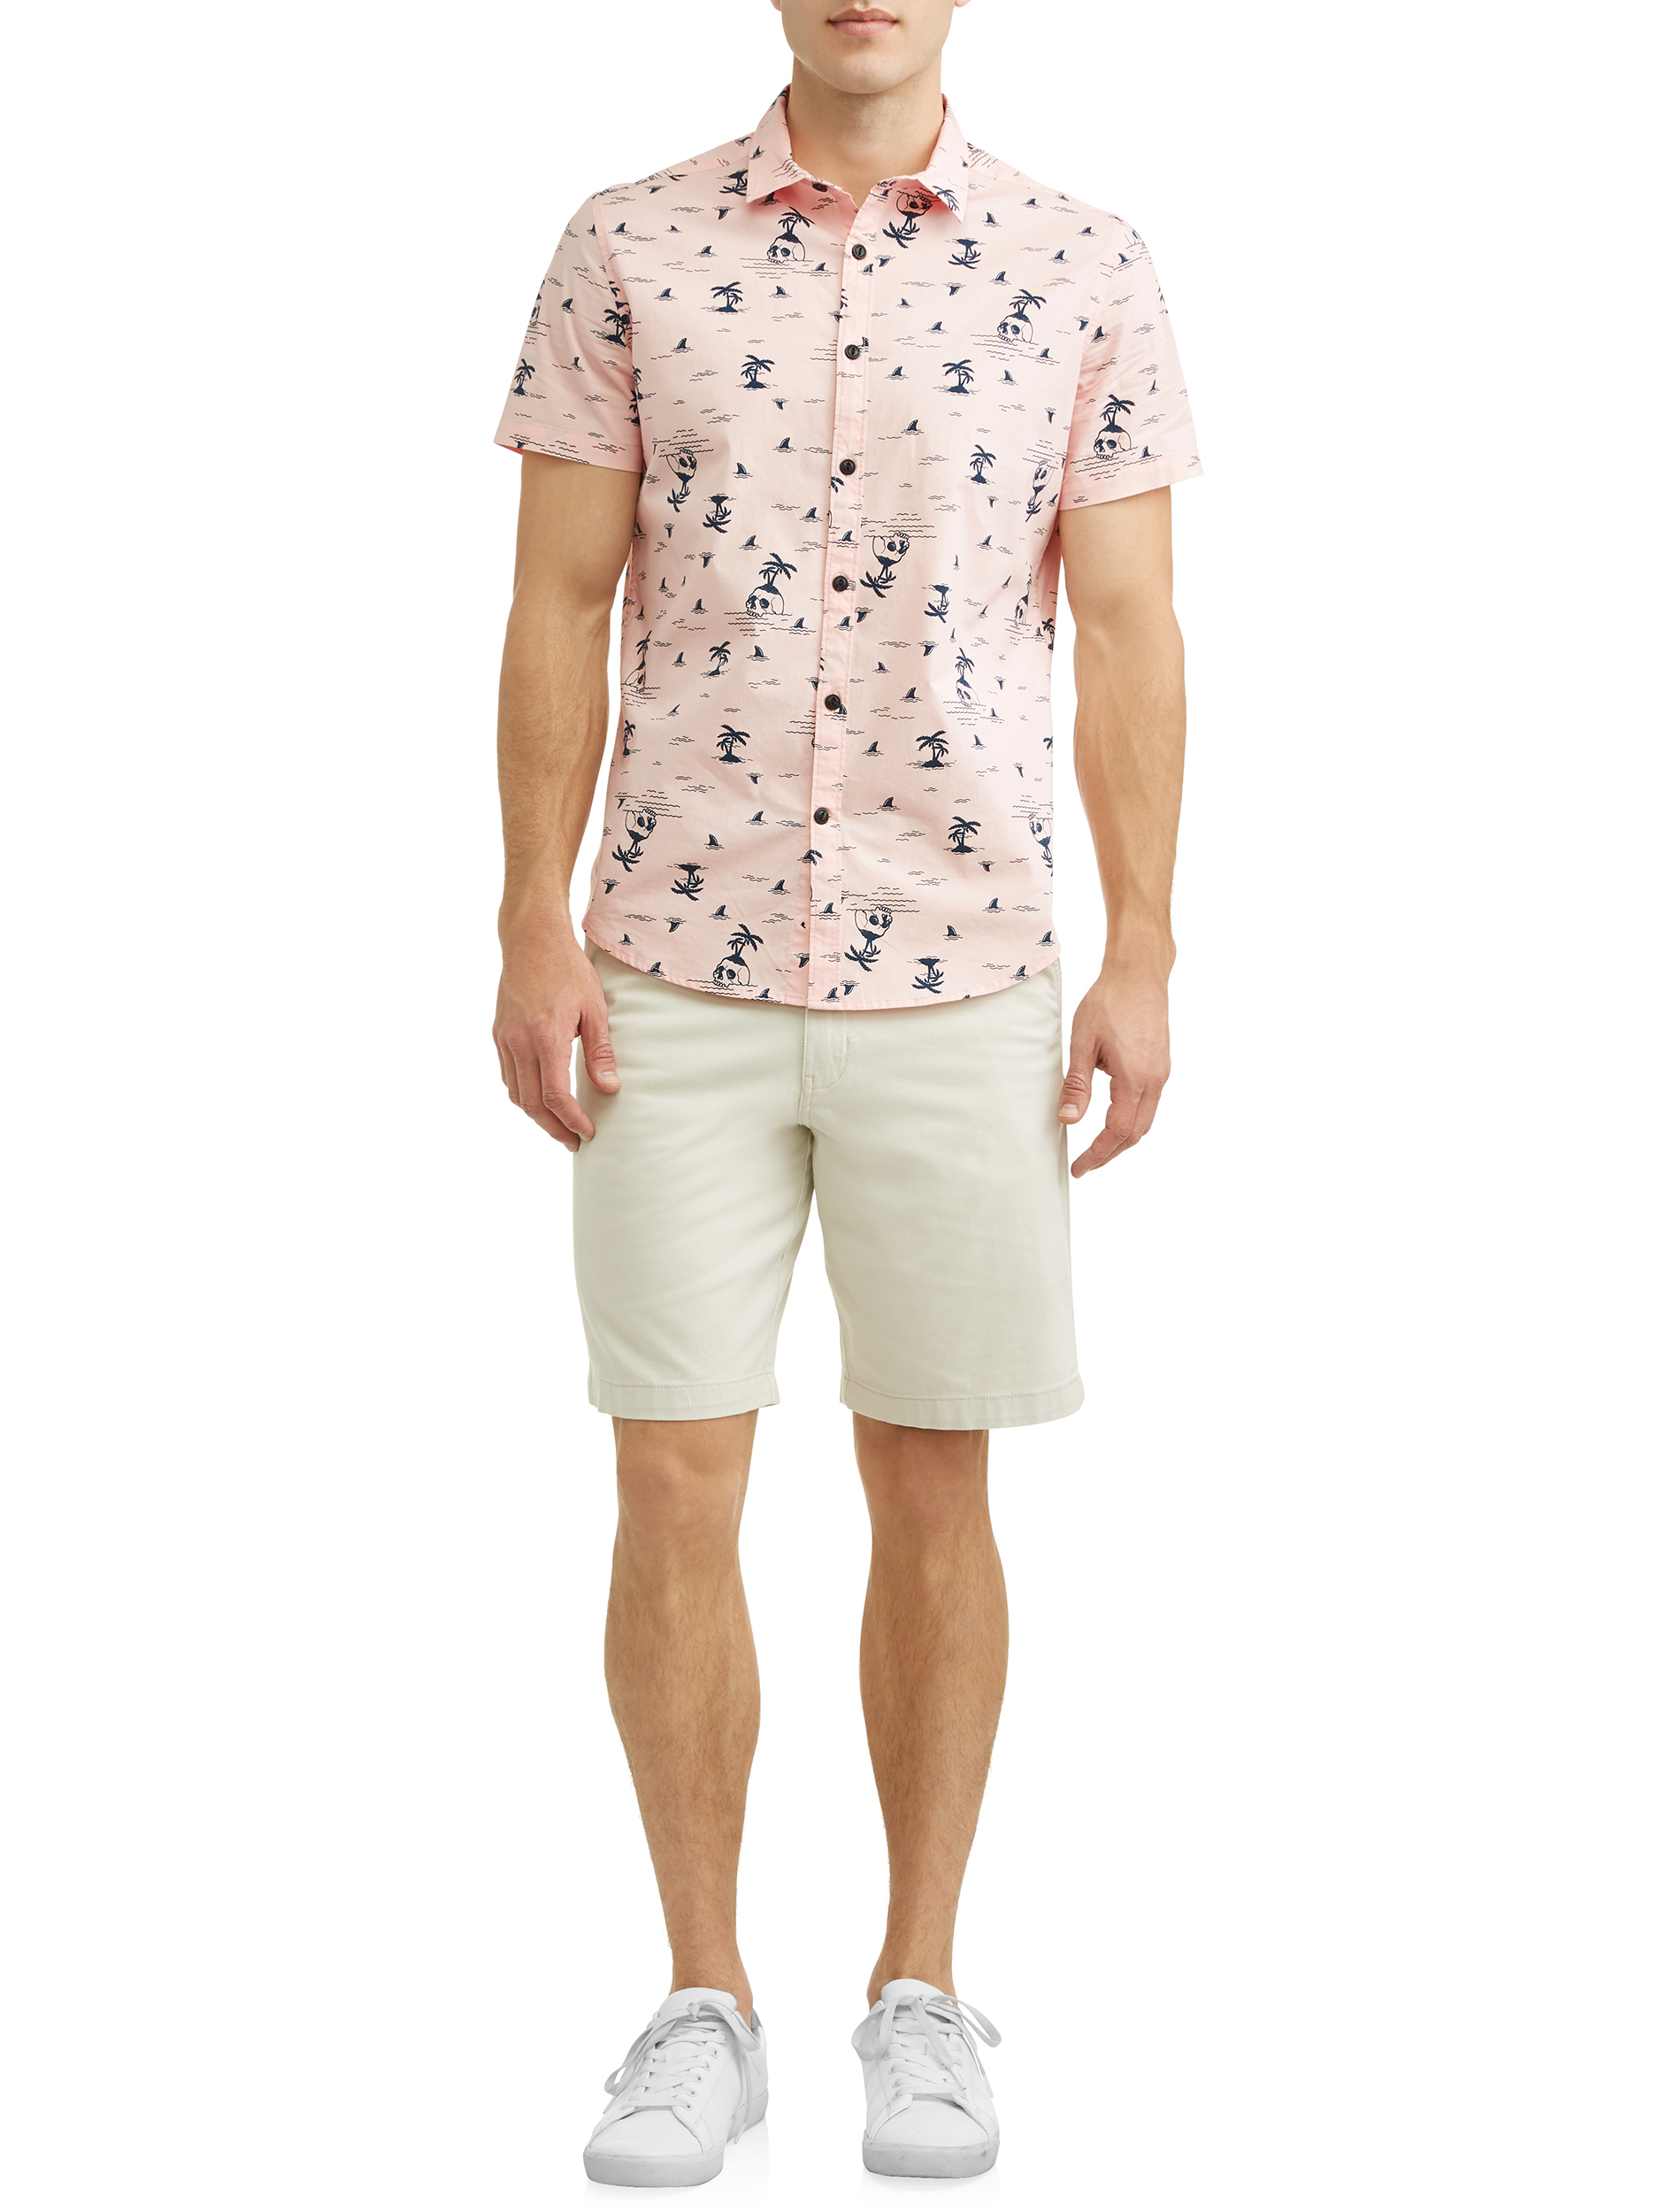 George Young Men's short sleeve Printed Shirt, up to size 3XL - image 2 of 4